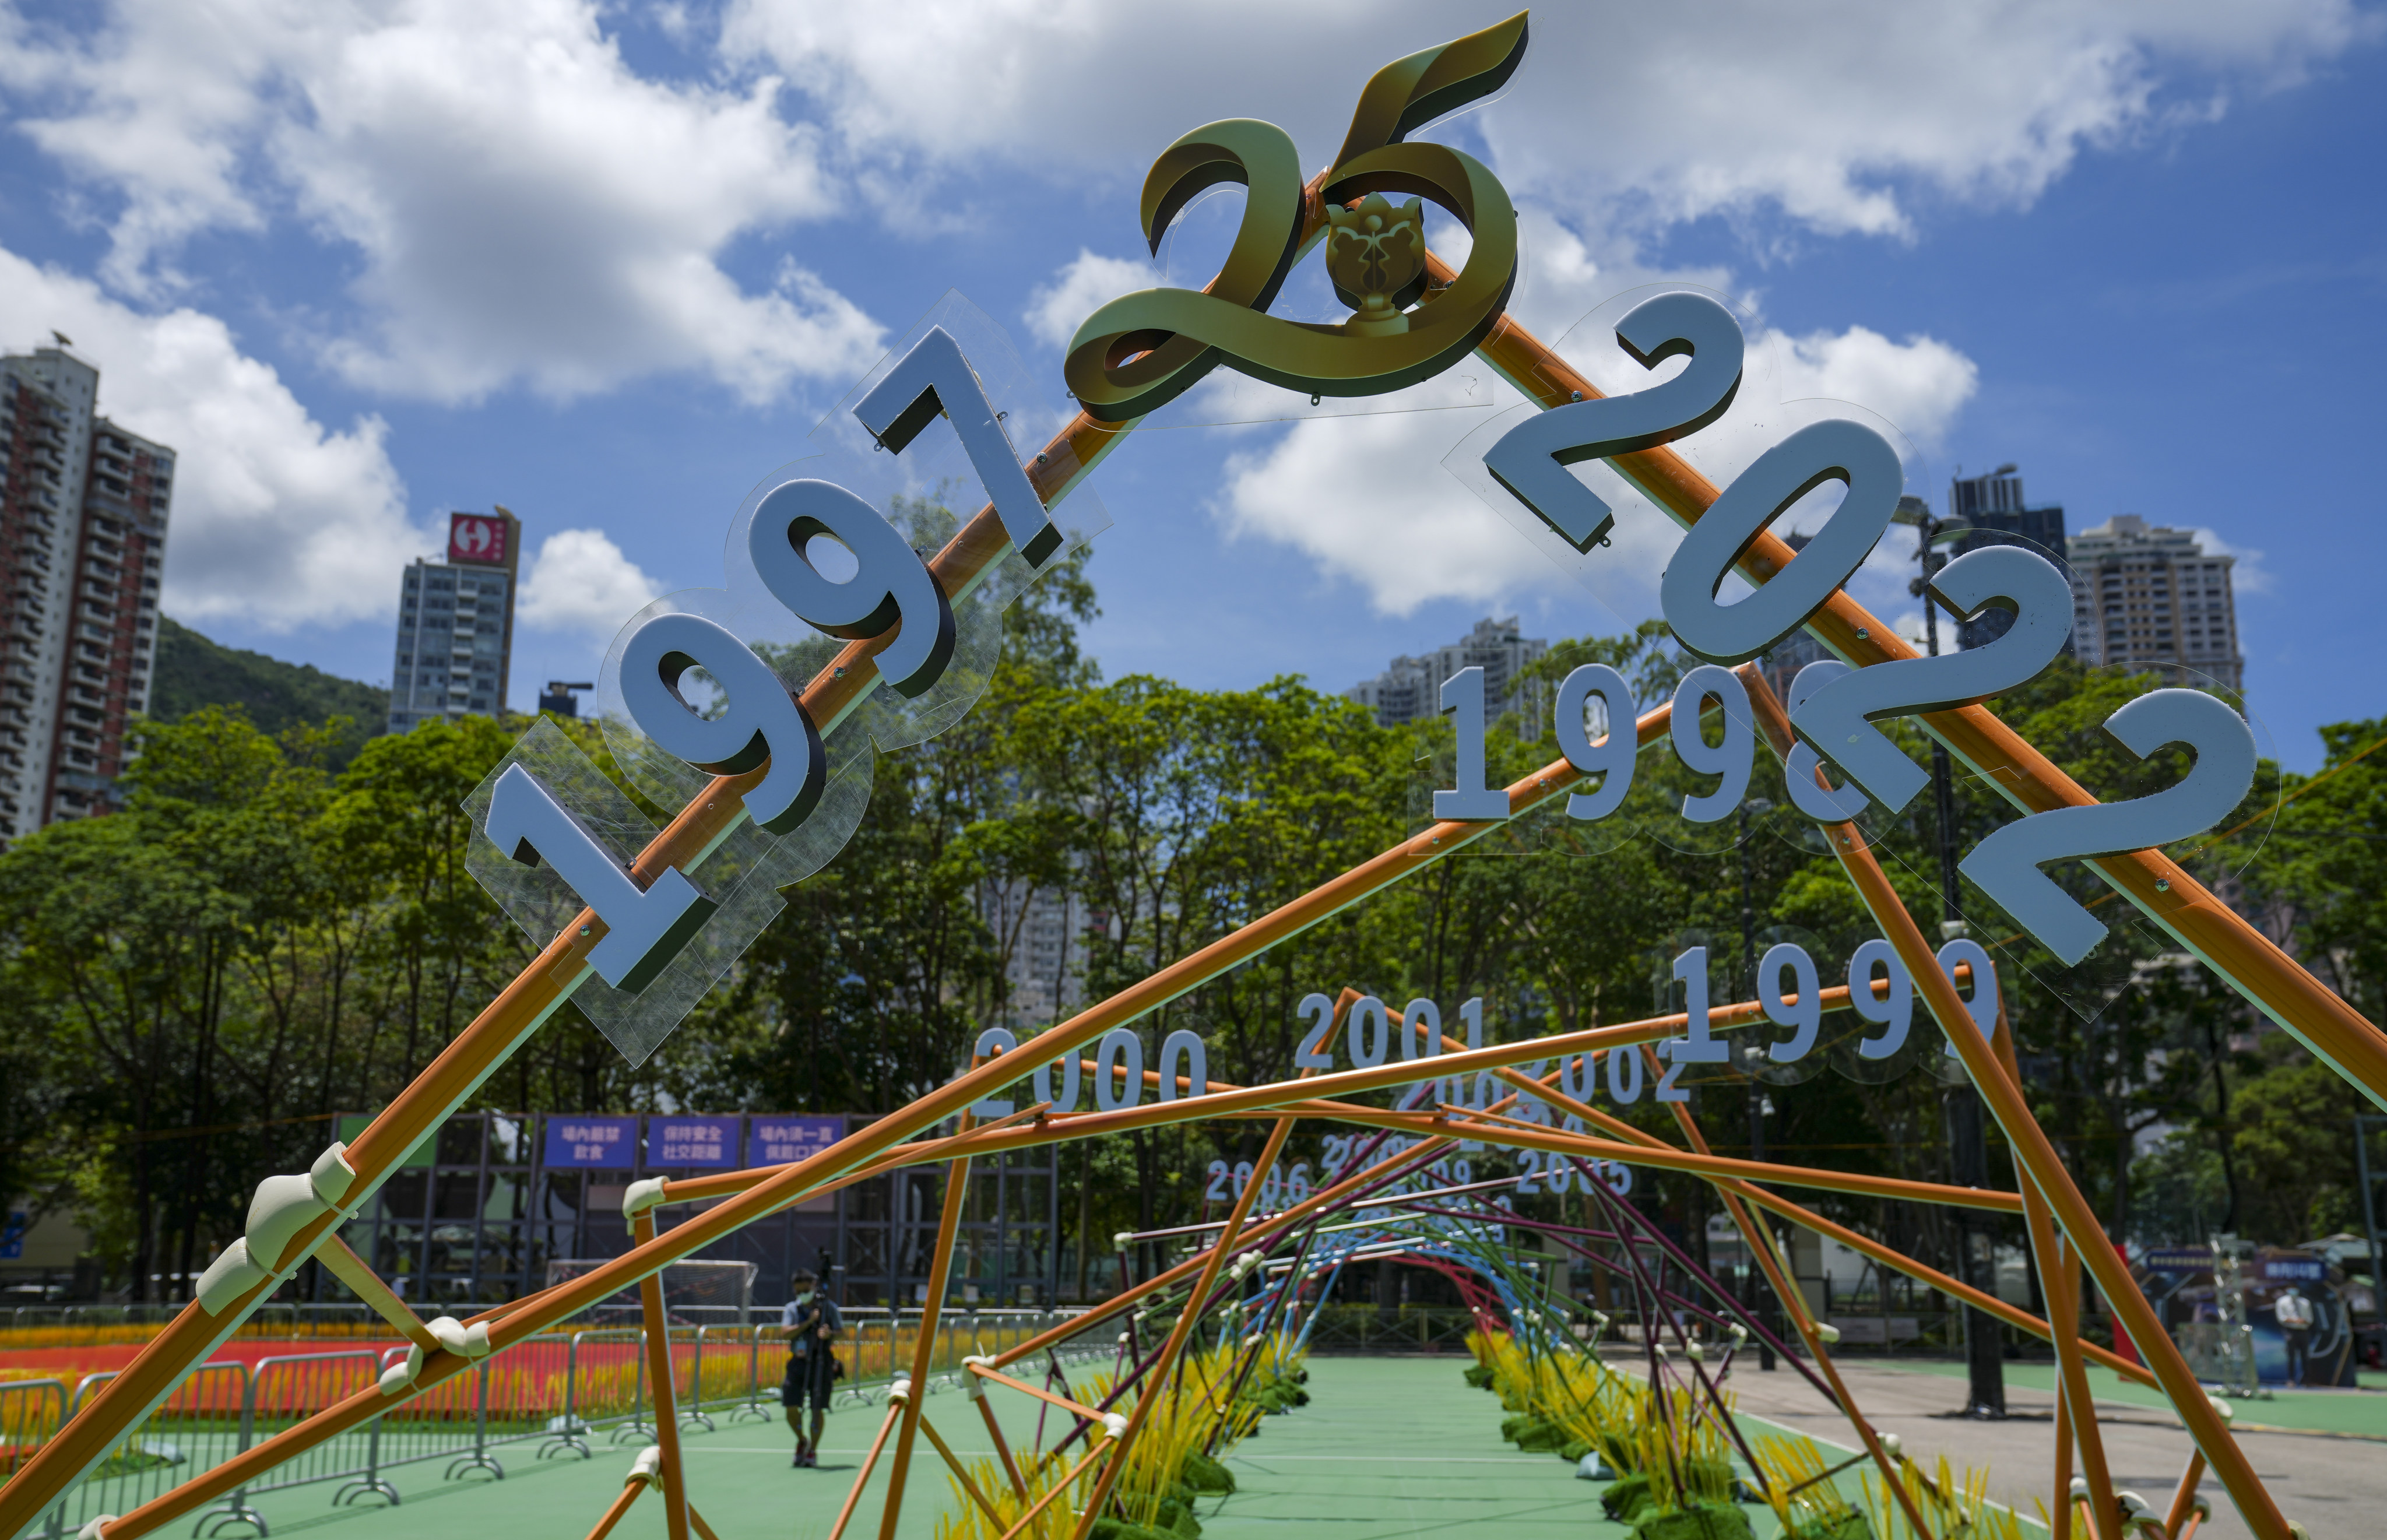 An installation at Victoria Park marks 25 years since Hong Kong’s return to China, during which the city has strengthened ties with its mainland neighbours. Photo: Sam Tsang